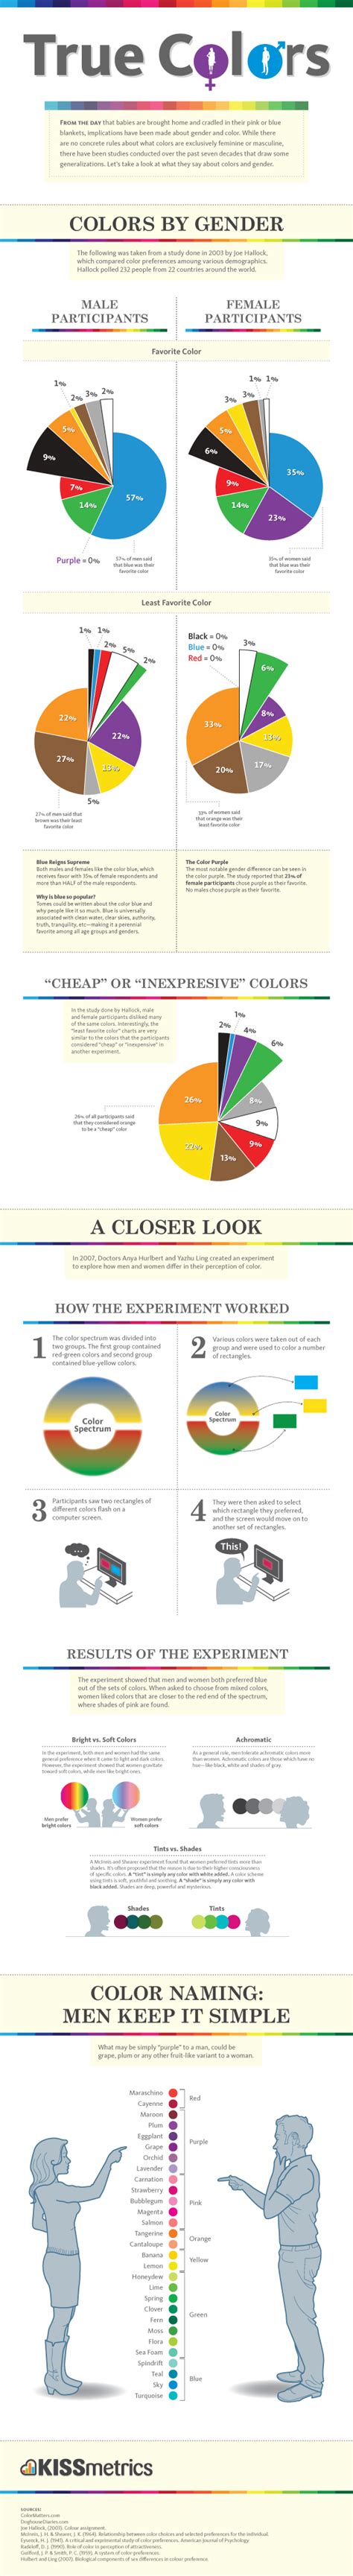 Studied relationship between color and gender has seen a wide range of ambiguous results over. True Colors Infographic - Breakdown of Color Preferences ...